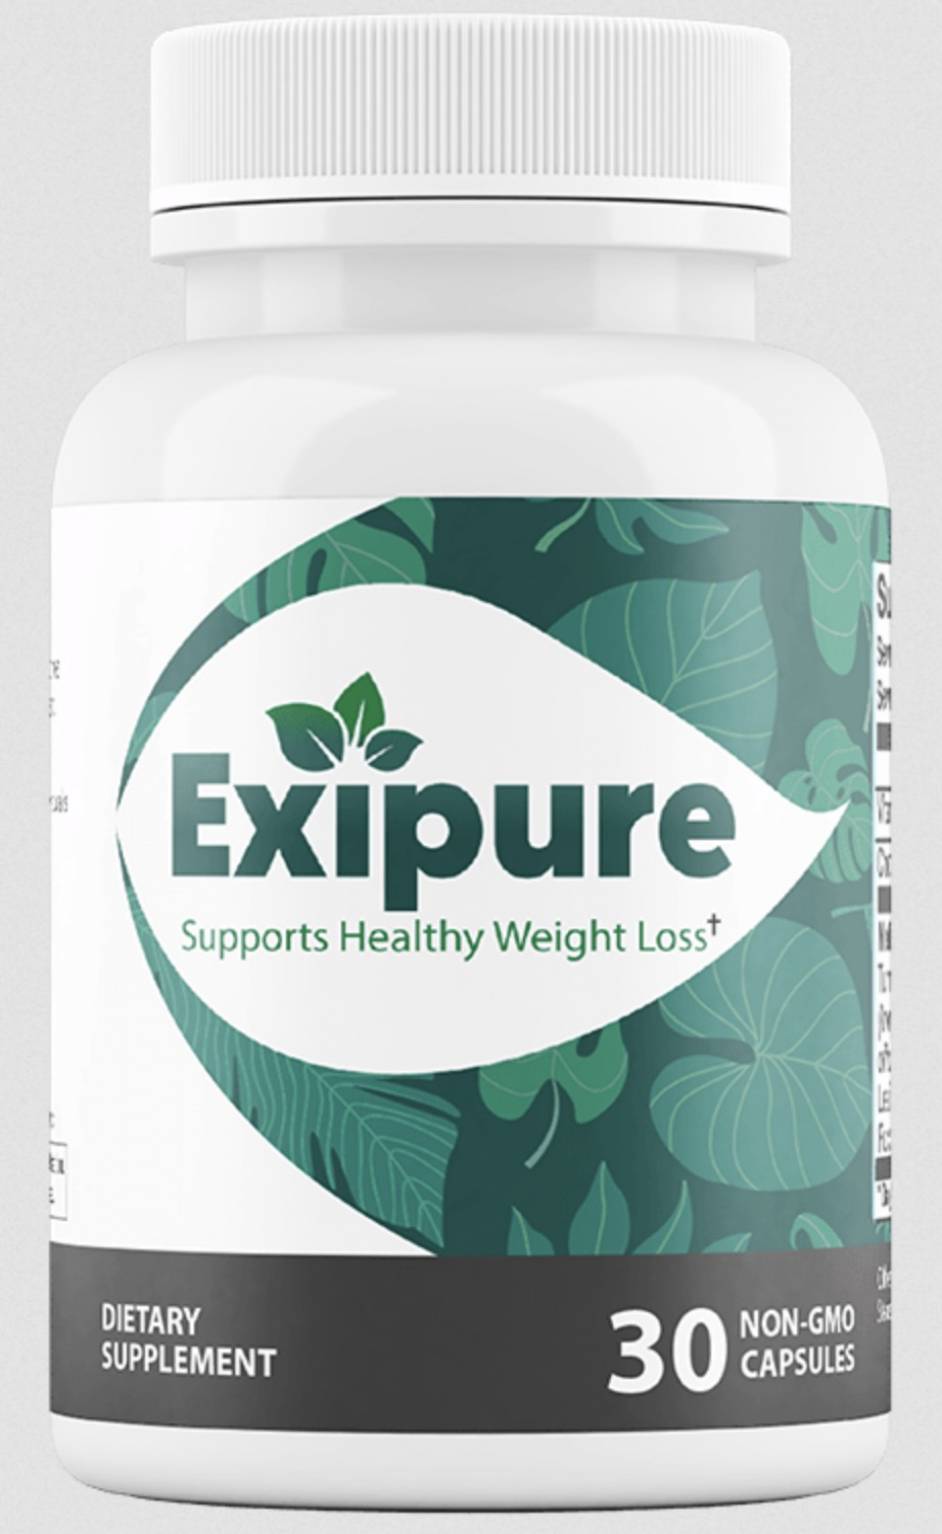 Exipure Official